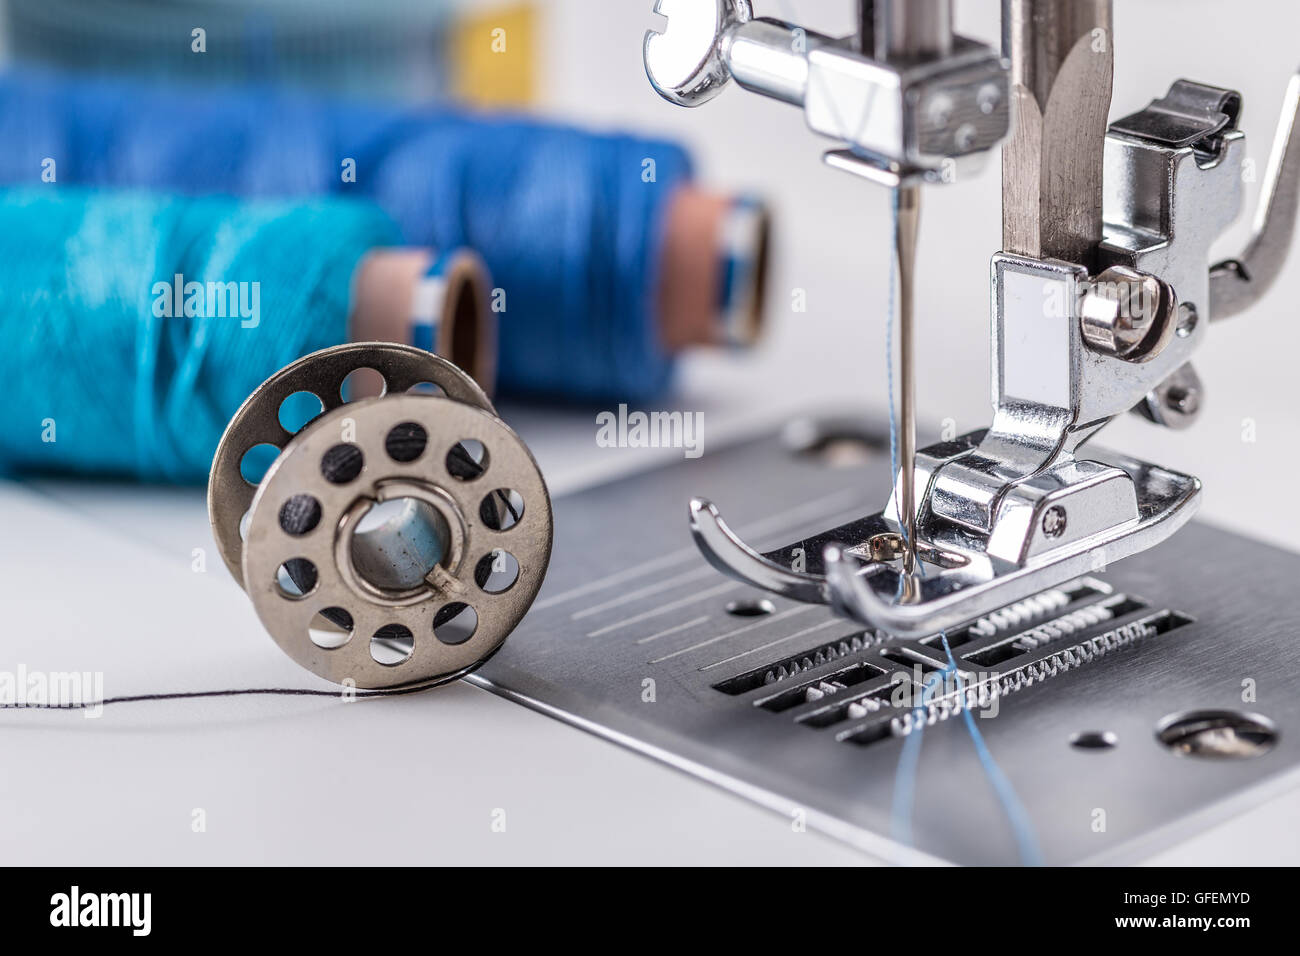 Detail of sewing machine with threads and a spool of thread Stock Photo